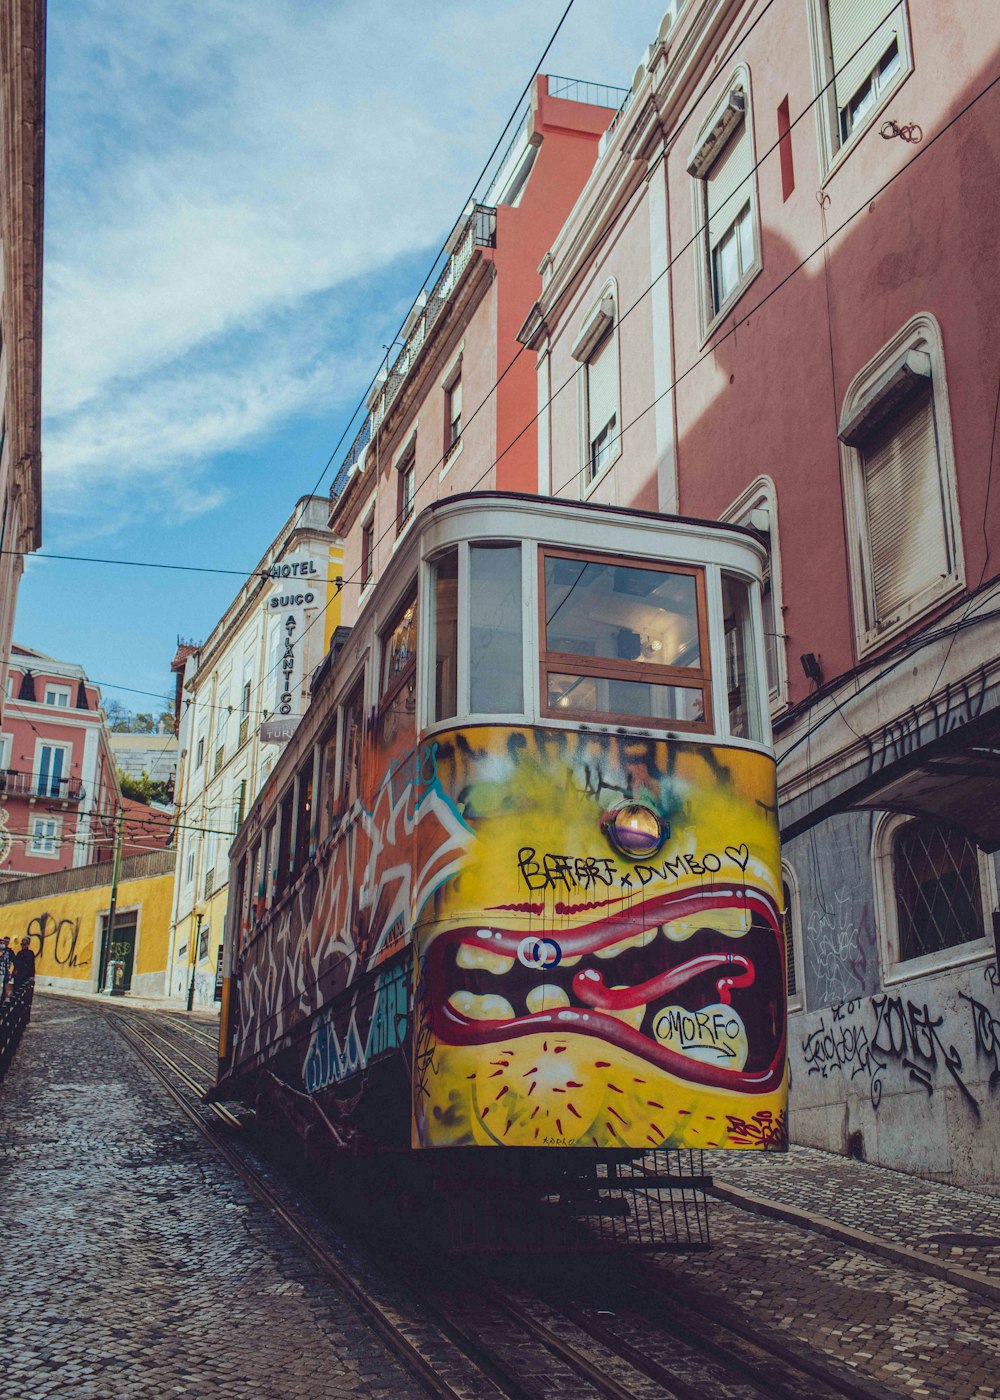 a trolley car with graffiti painted on the side of it